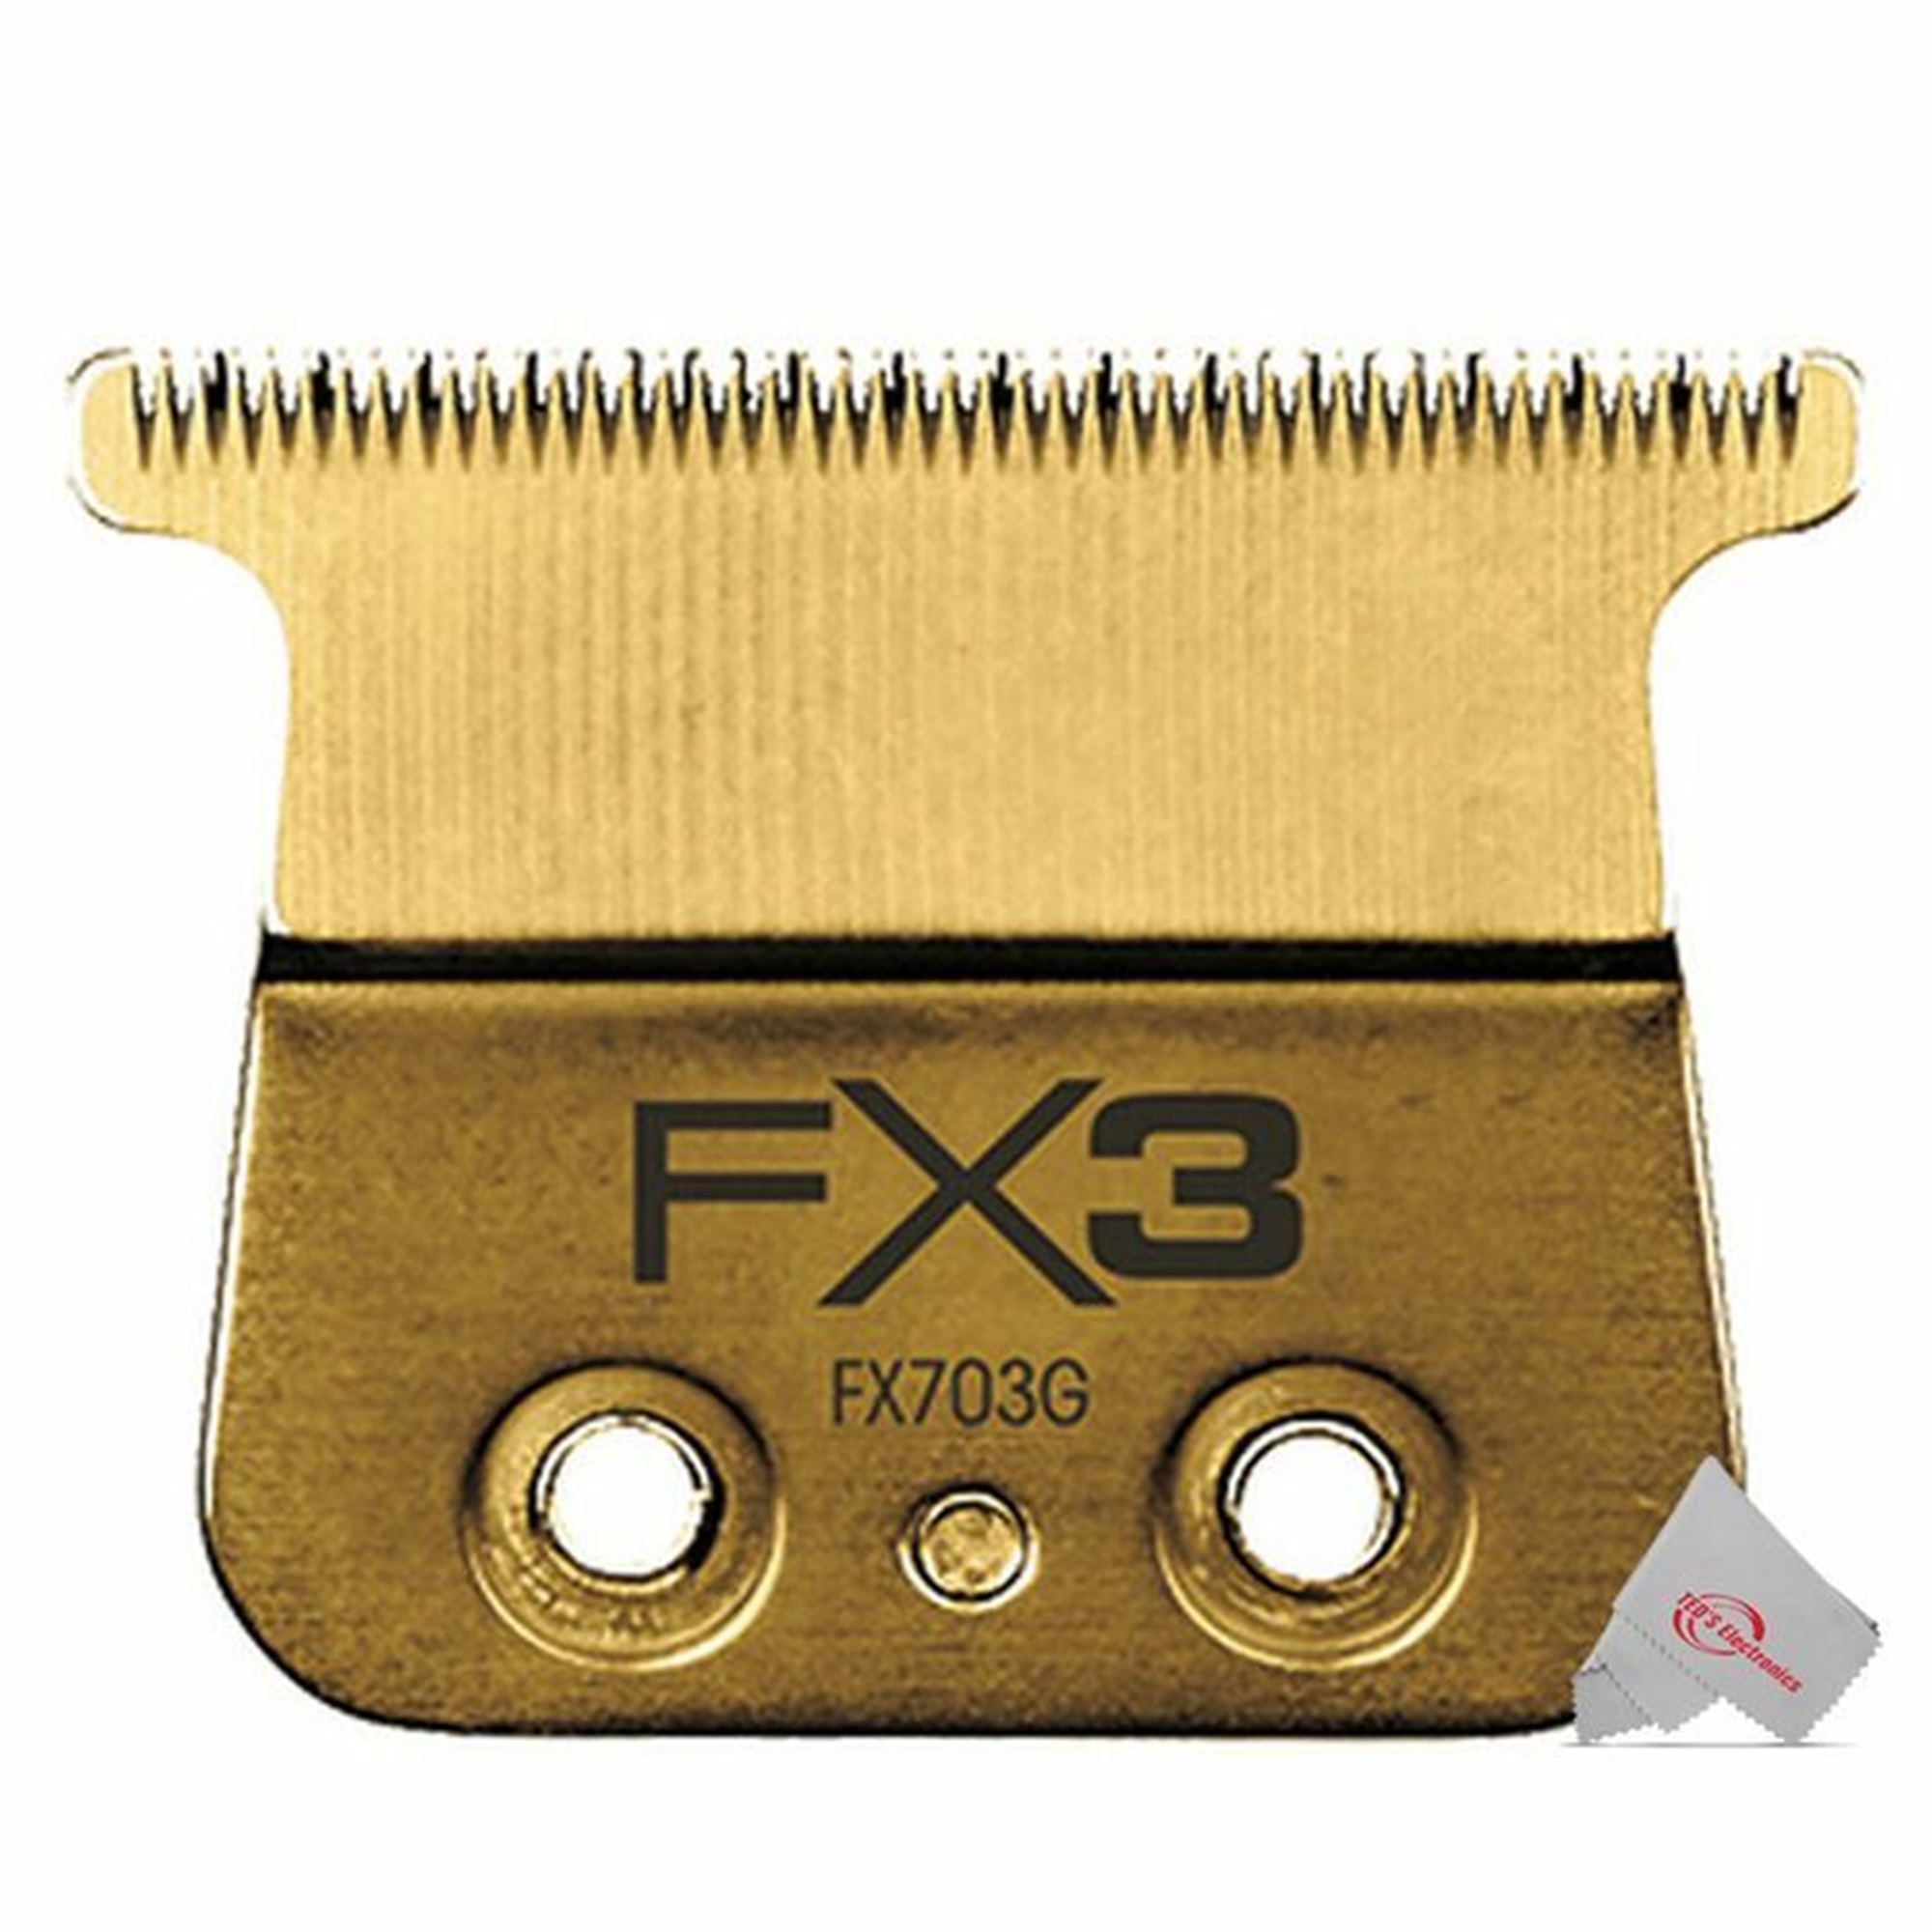 Babyliss Pro 3x BabylissPro FX3 Trimmer Replacement Blade #FX703G